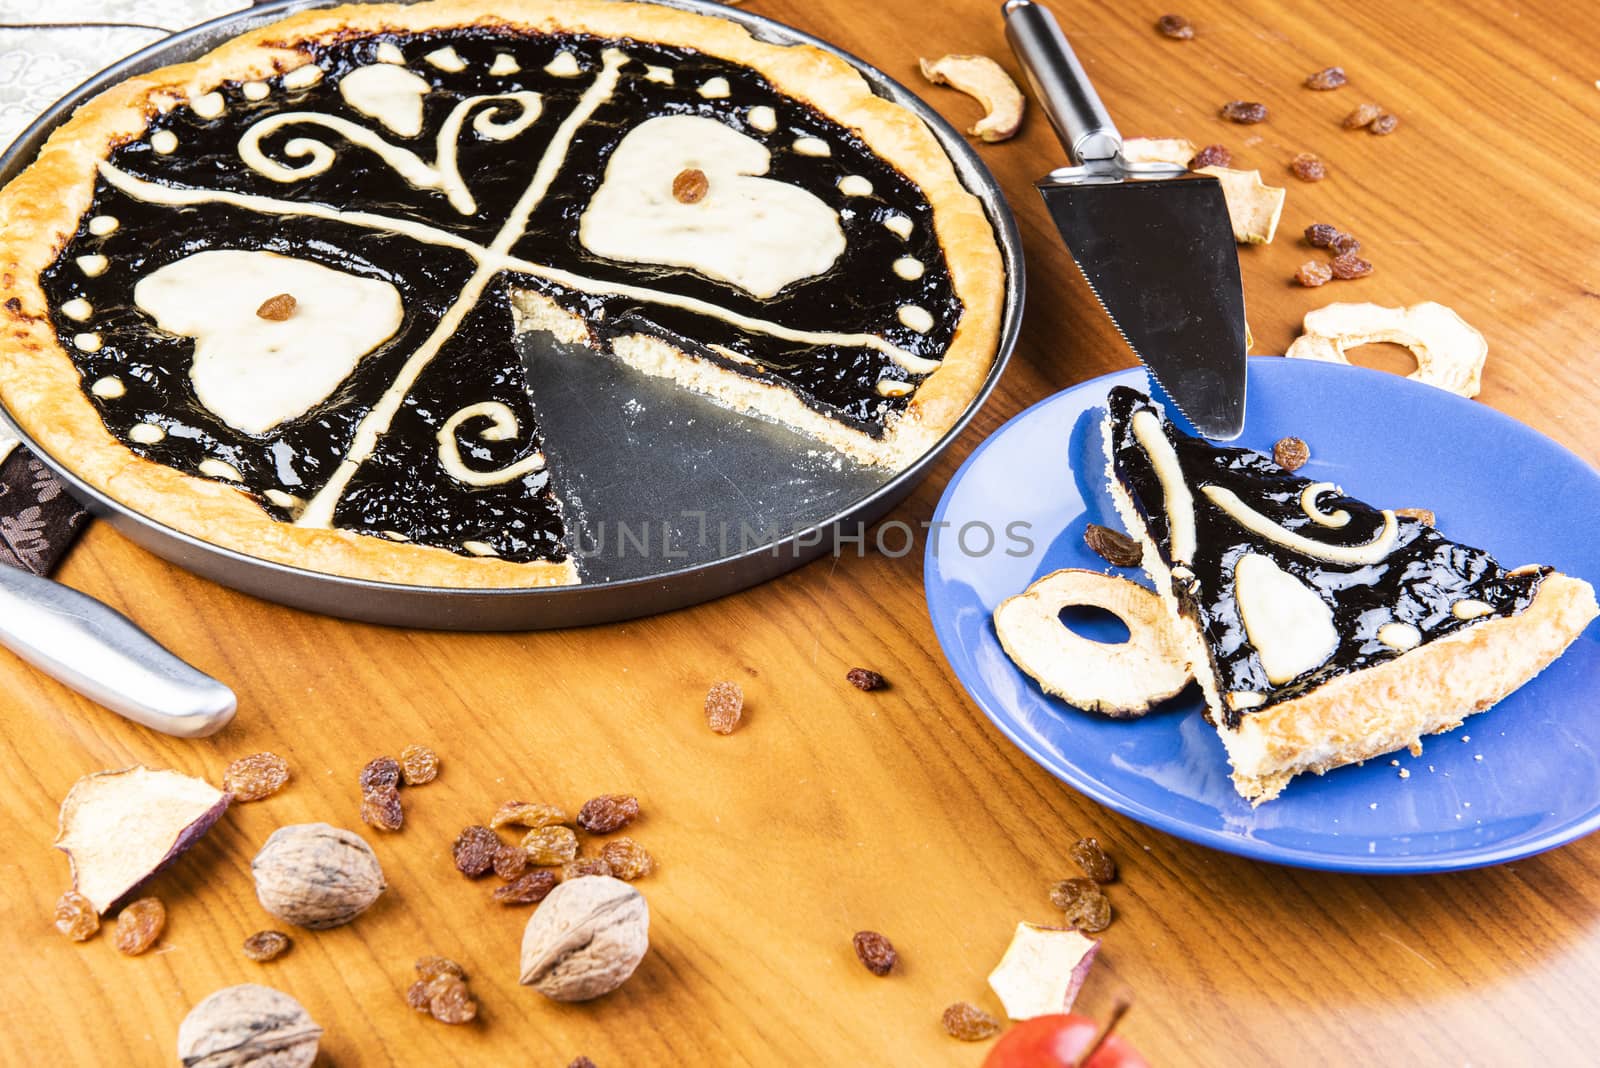 Czech regional traditional hand and home made round pie Chodsky kolac. This one has heart made of quark surounded by plum jam filling. Still life of one slice cut with nuts and fruits around on a wooden table